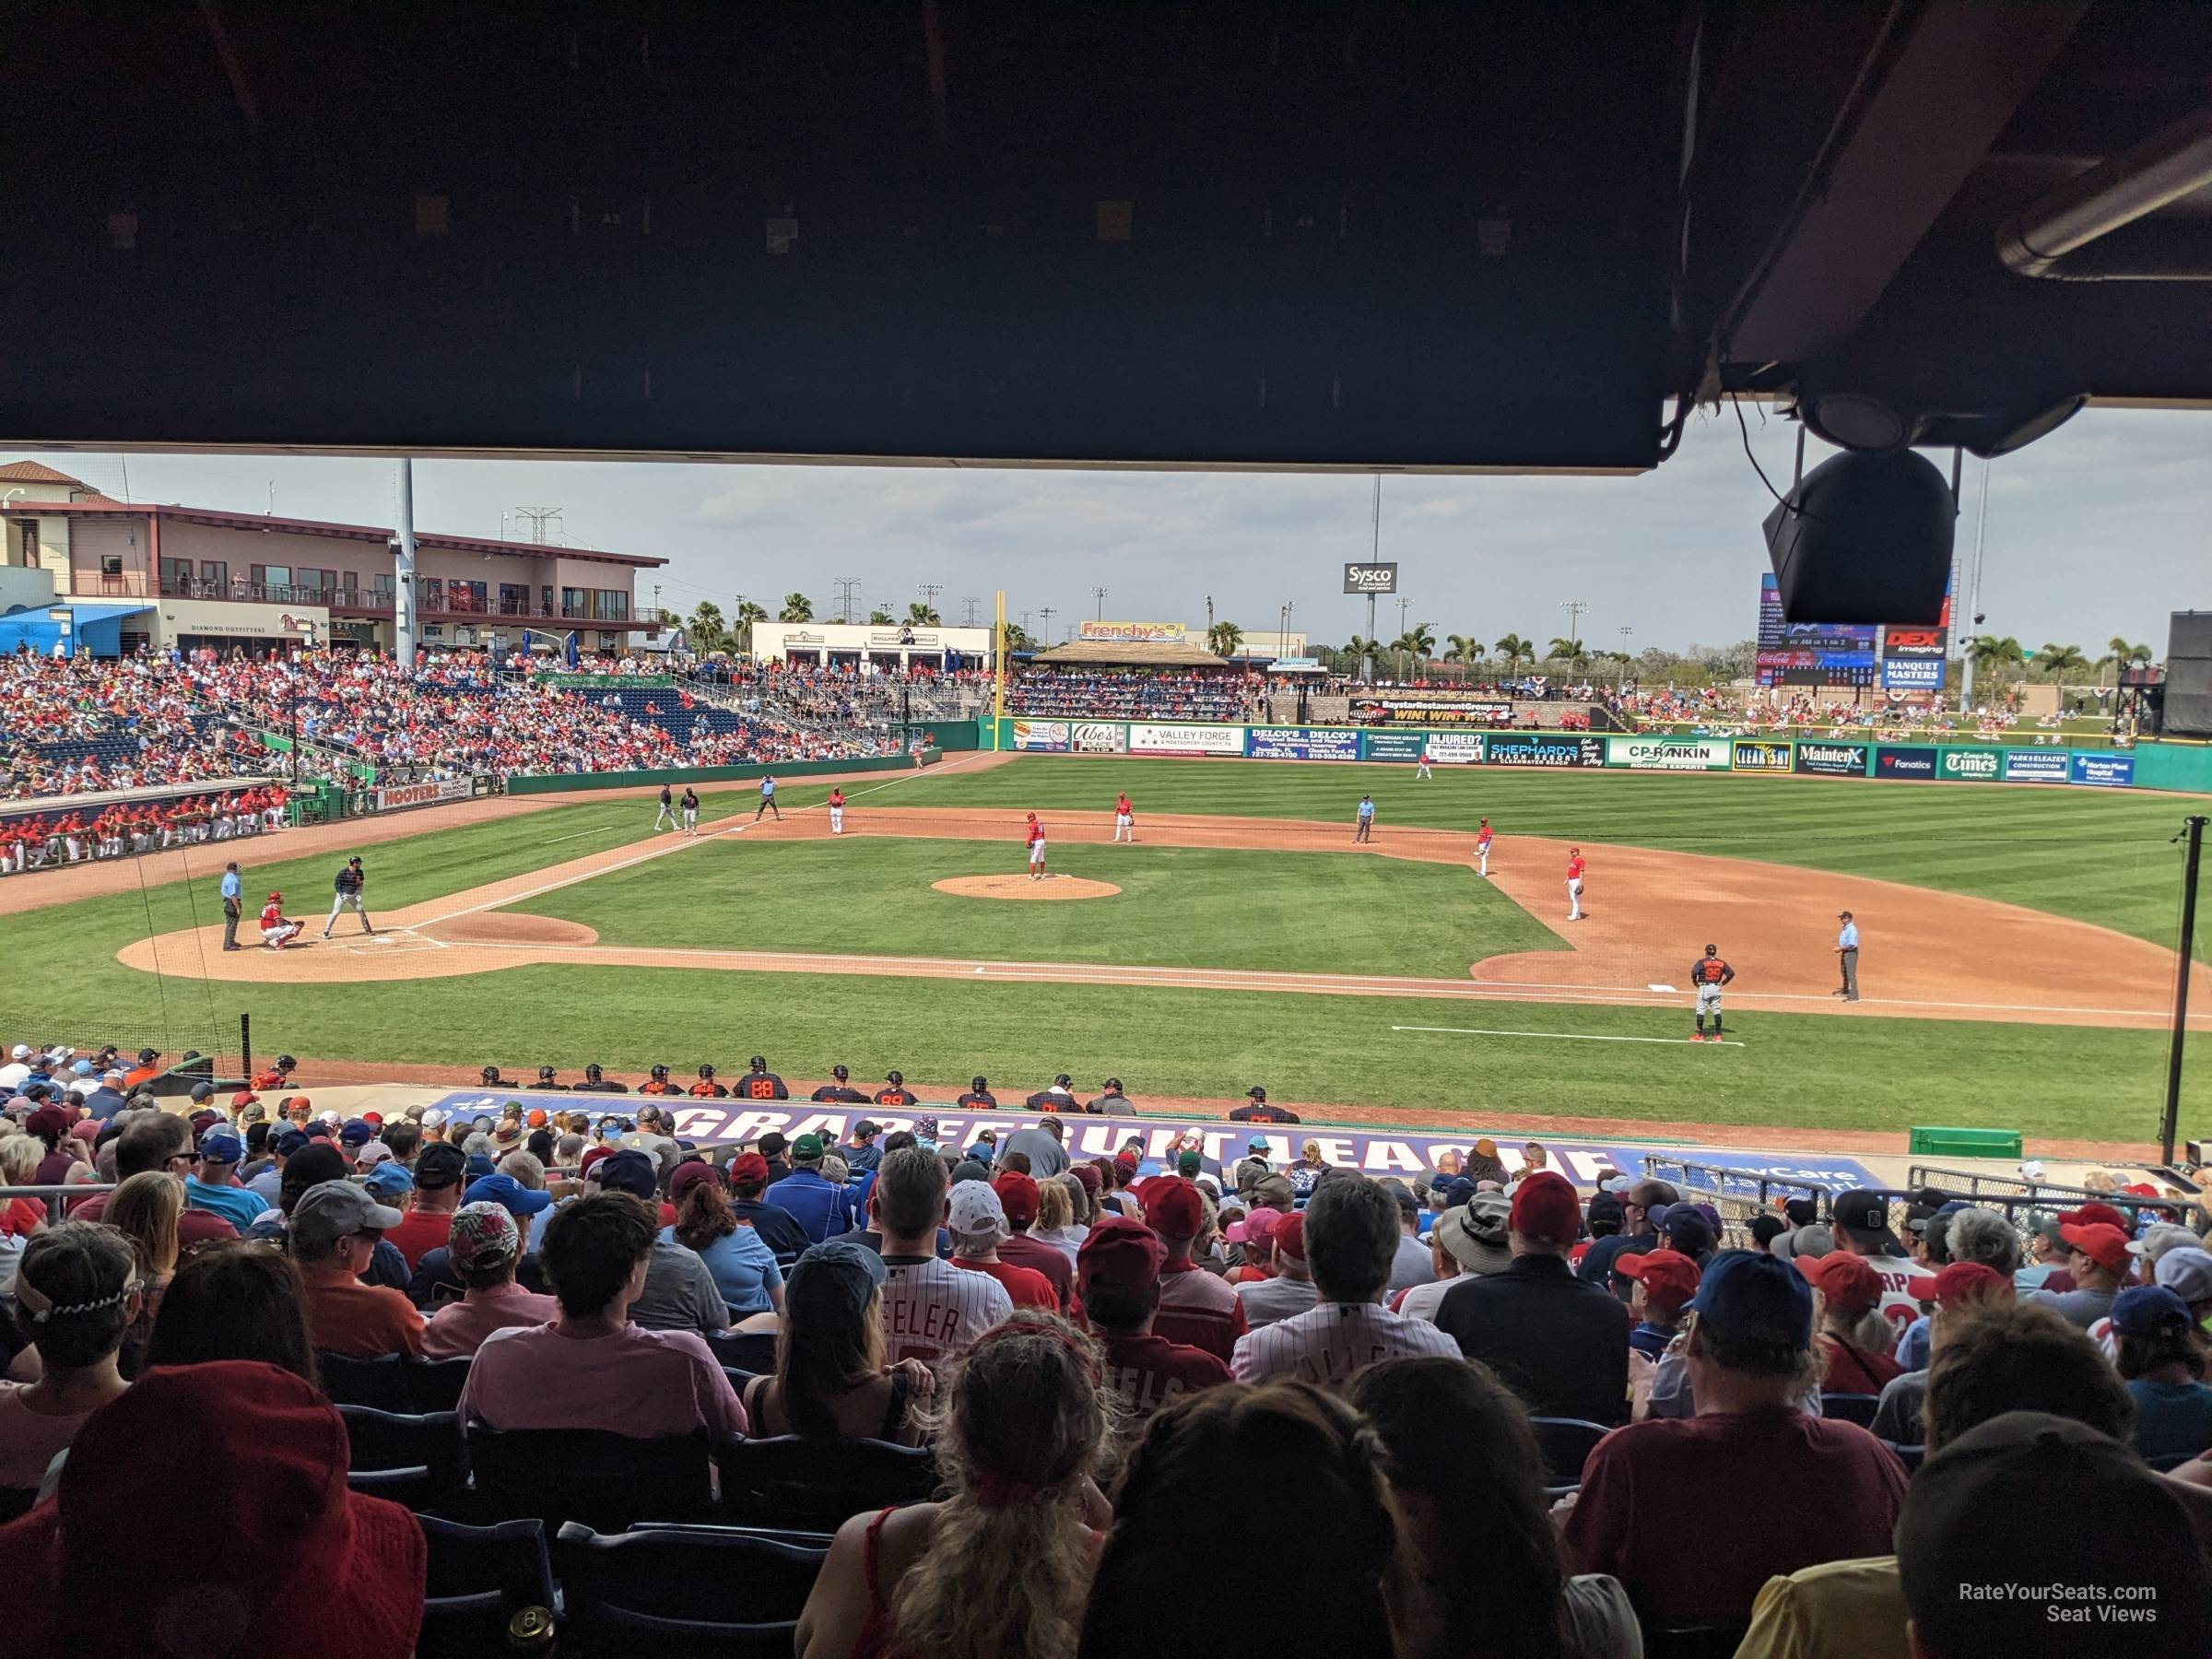 section 106, row 23 seat view  - baycare ballpark